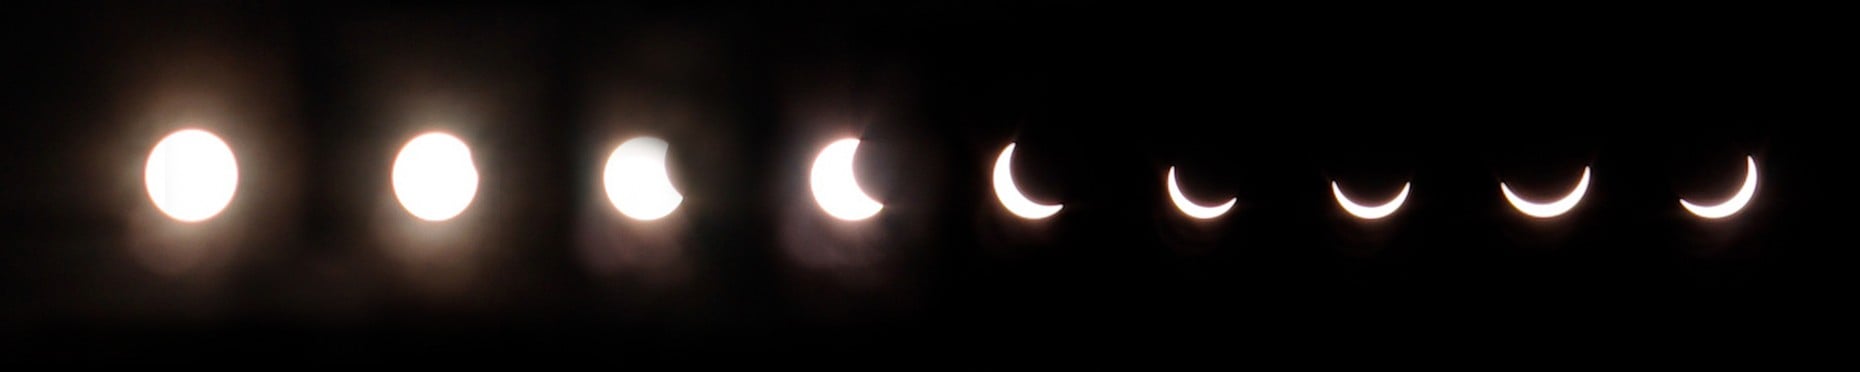 A time-lapse of the eclipse, Photo: Jim Bass